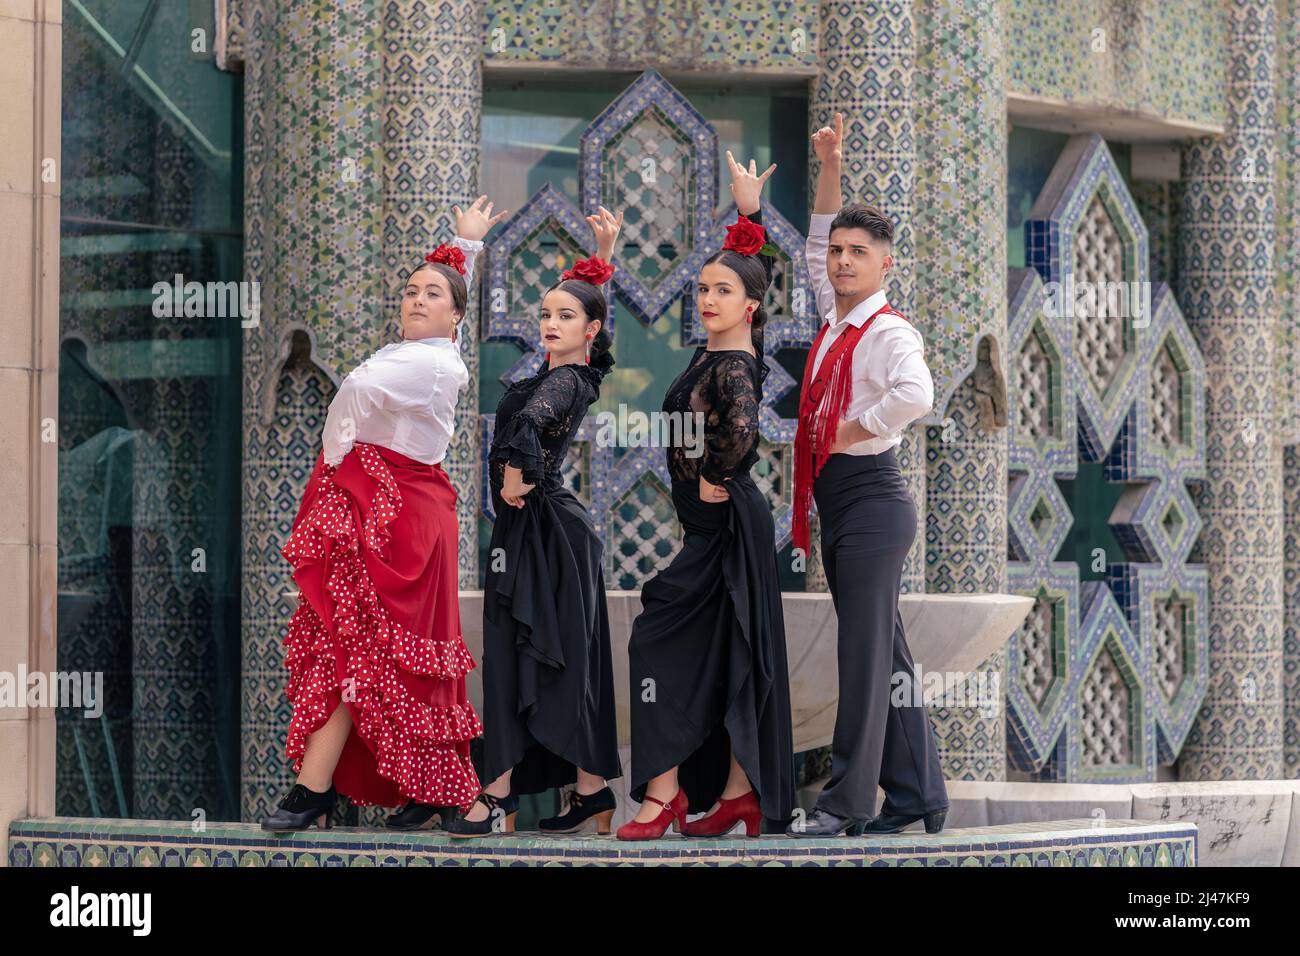 young apprentice flamenco dancers pose in front of a Mudejar-style fountain Stock Photo